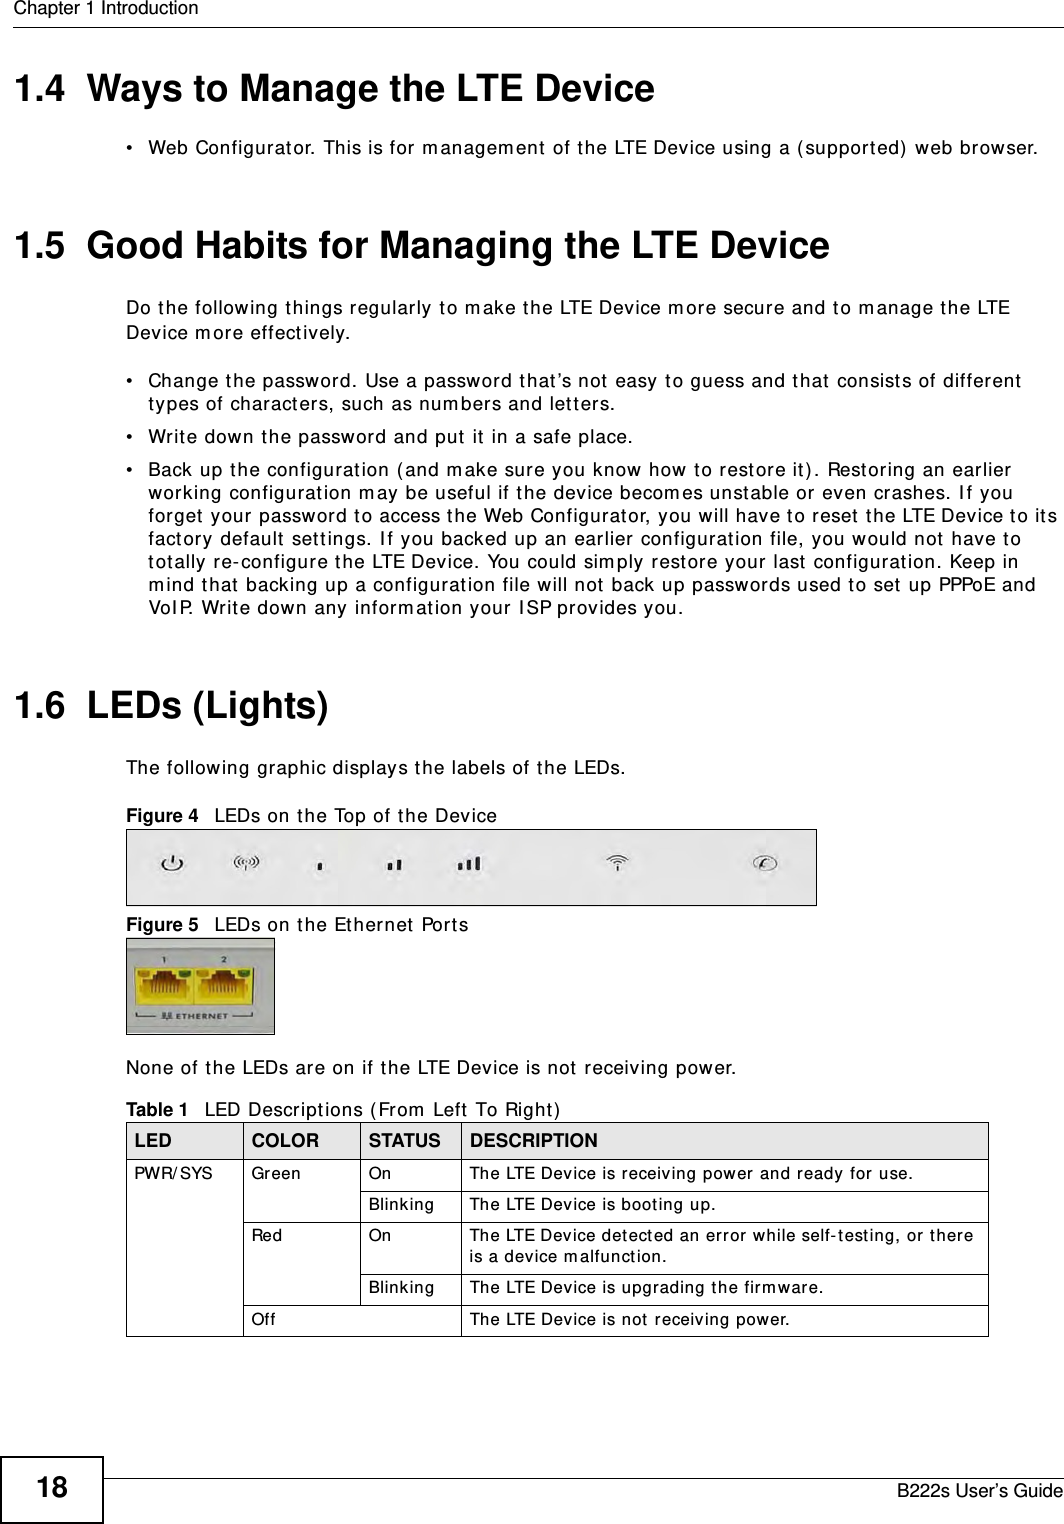 Chapter 1 IntroductionB222s User’s Guide181.4  Ways to Manage the LTE Device• Web Configurat or. This is for m anagem ent  of the LTE Device using a ( support ed)  web browser.1.5  Good Habits for Managing the LTE DeviceDo t he following t hings regularly t o m ake the LTE Device m ore secur e and to m anage t he LTE Device m ore effect ively.• Change t he password. Use a password that ’s not  easy t o guess and that  consist s of different types of charact ers, such as num bers and let t ers.• Writ e down the password and put  it  in a safe place.• Back up t he configurat ion ( and m ake sur e you know how t o restore it ) . Restoring an earlier working configurat ion m ay be useful if the device becom es unst able or even crashes. I f you forget your password to access t he Web Configurat or, you will have t o r eset the LTE Device t o its fact ory default set tings. I f you backed up an earlier configurat ion file, you would not have t o tot ally re- configure t he LTE Device. You could sim ply restore your last  configurat ion. Keep in m ind t hat  backing up a configurat ion file will not  back up passwords used t o set up PPPoE and VoI P. Writ e down any inform ation your I SP provides you.1.6  LEDs (Lights)The following graphic displays t he labels of t he LEDs.Figure 4   LEDs on t he Top of t he DeviceFigure 5   LEDs on t he Et hernet PortsNone of the LEDs are on if the LTE Device is not  receiving power.Table 1   LED Descript ions ( From  Left  To Right )LED COLOR STATUS DESCRIPTIONPWR/ SYS Green On The LTE Device is receiv ing power and ready for use.Blinking The LTE Device is booting up.Red  On The LTE Device detected an error while self- test ing,  or  t here is a device m alfunct ion.Blinking The LTE Device is upgrading t he firm ware.Off The LTE Device is not  receiv ing power.